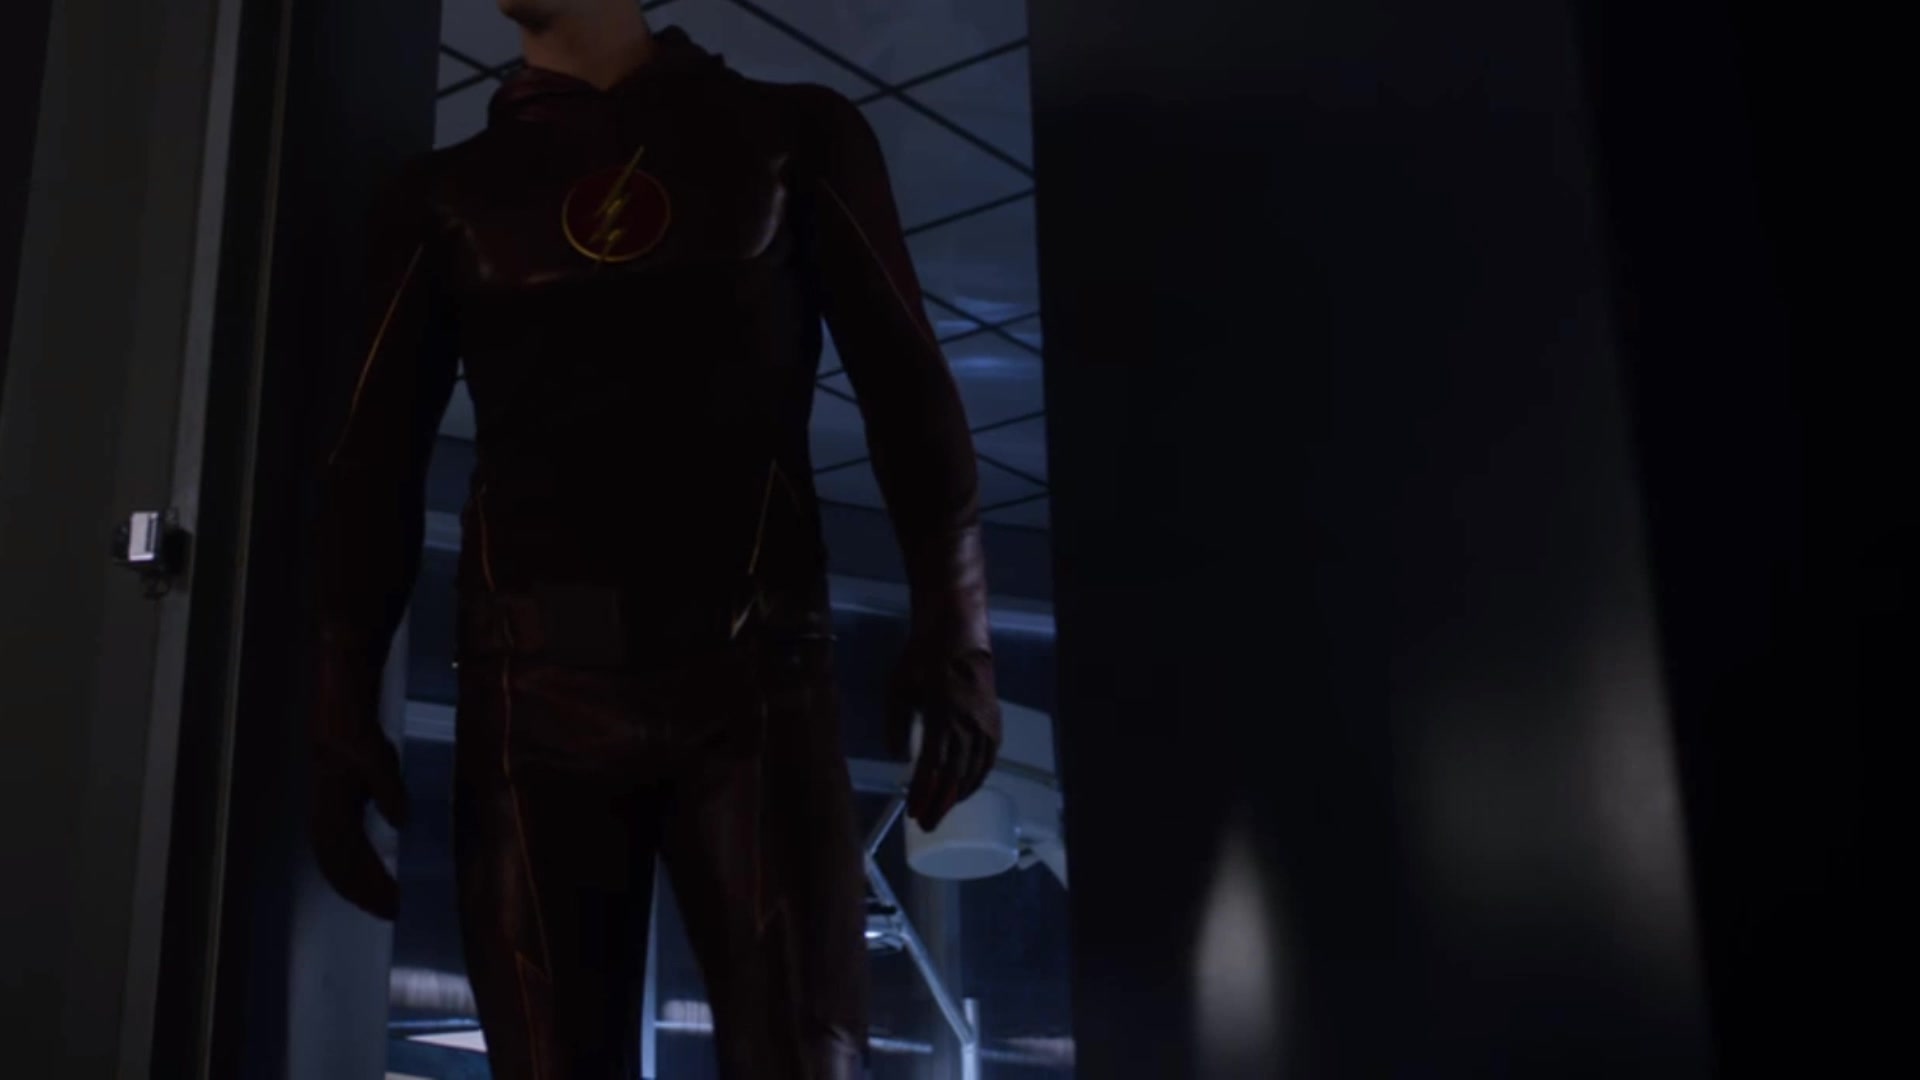 The flash is SEXY AS FUCK! Society is sexist about men